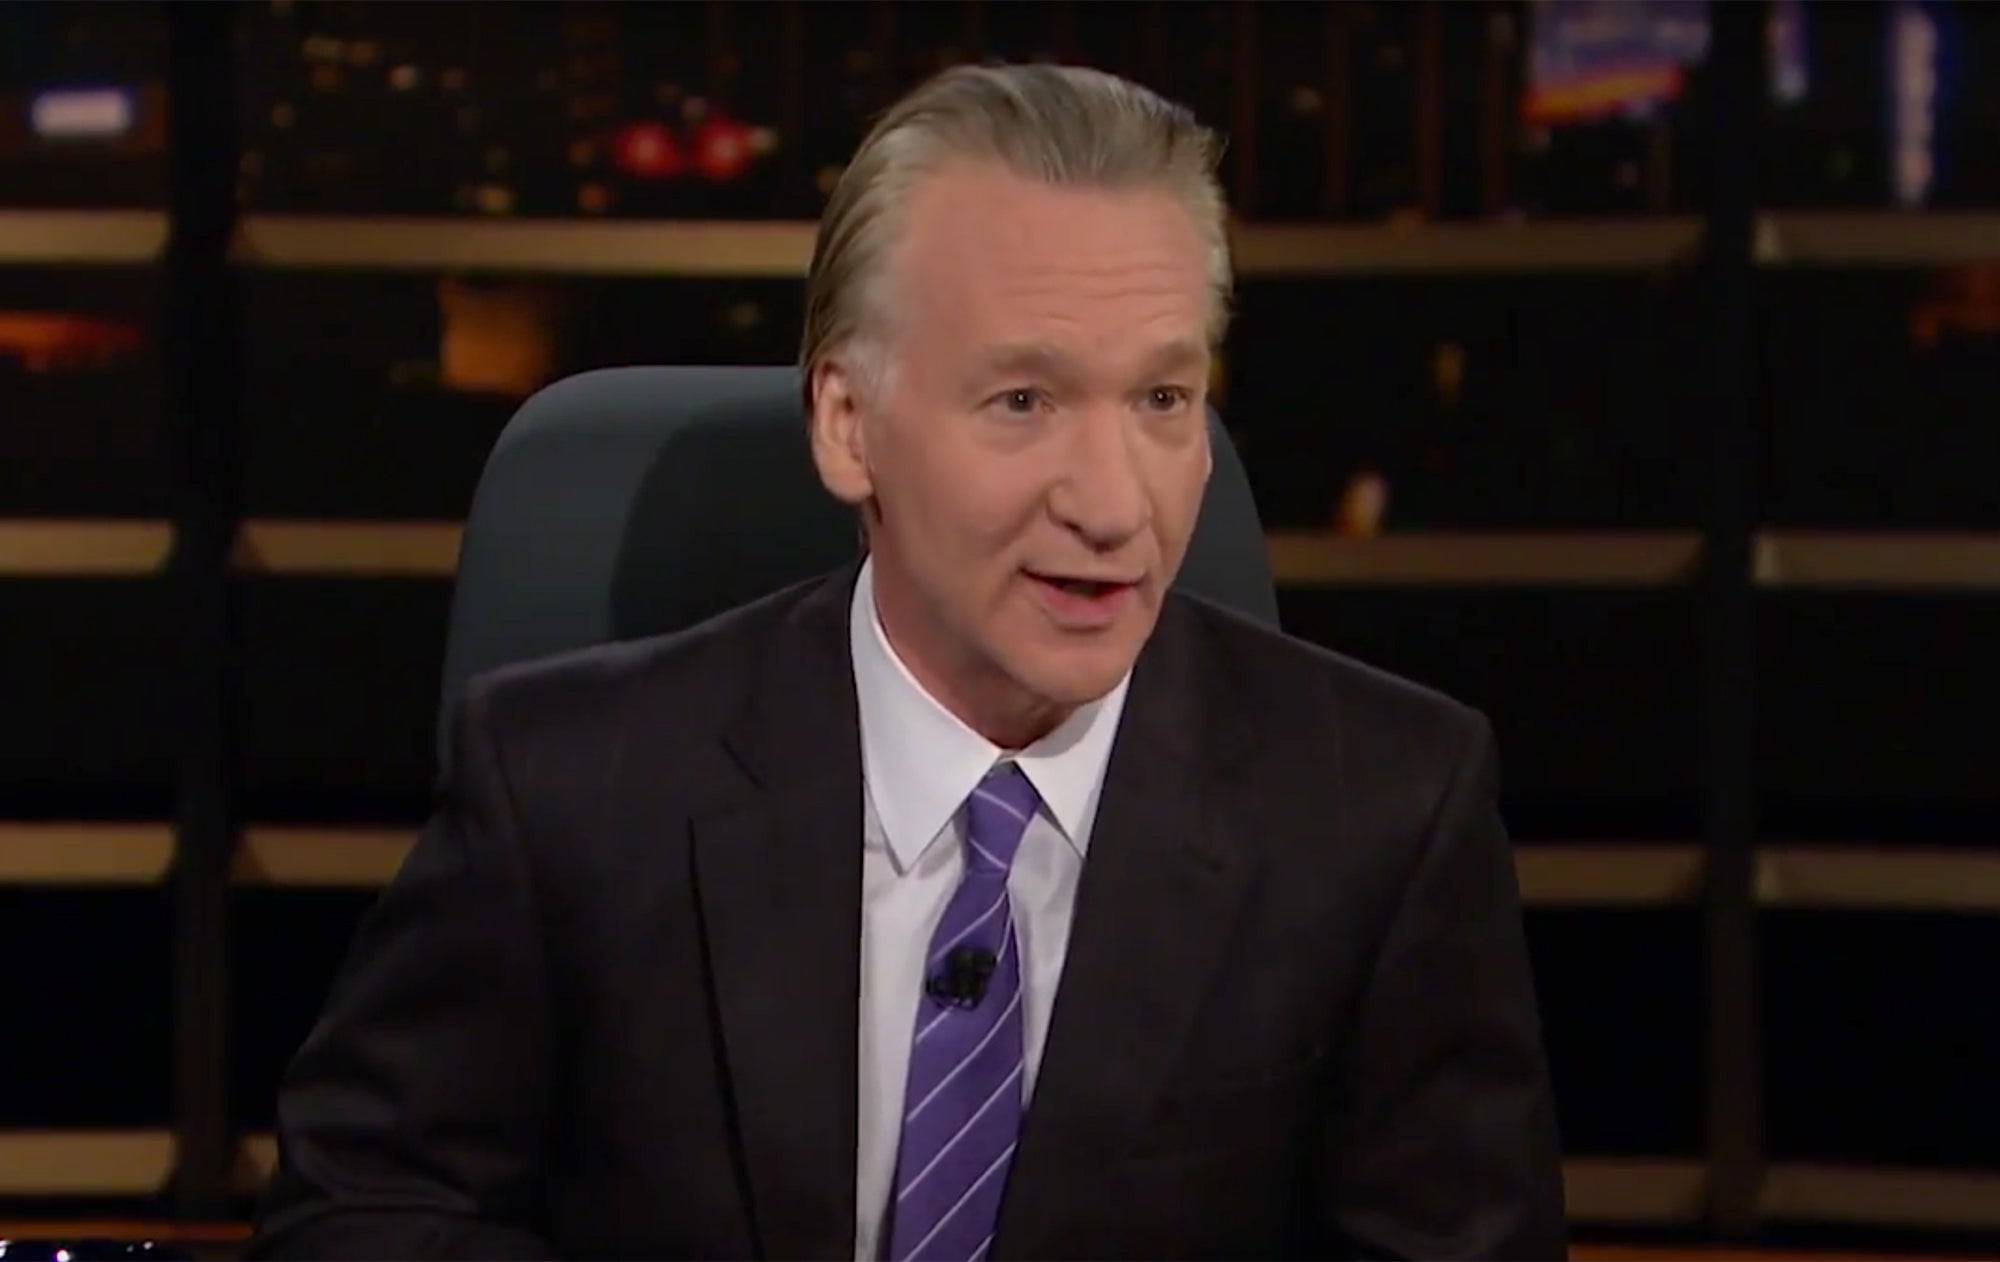 HBO Responds to Bill Maher’s ‘Inexcusable and Tasteless’ Use of the N-Word on Air